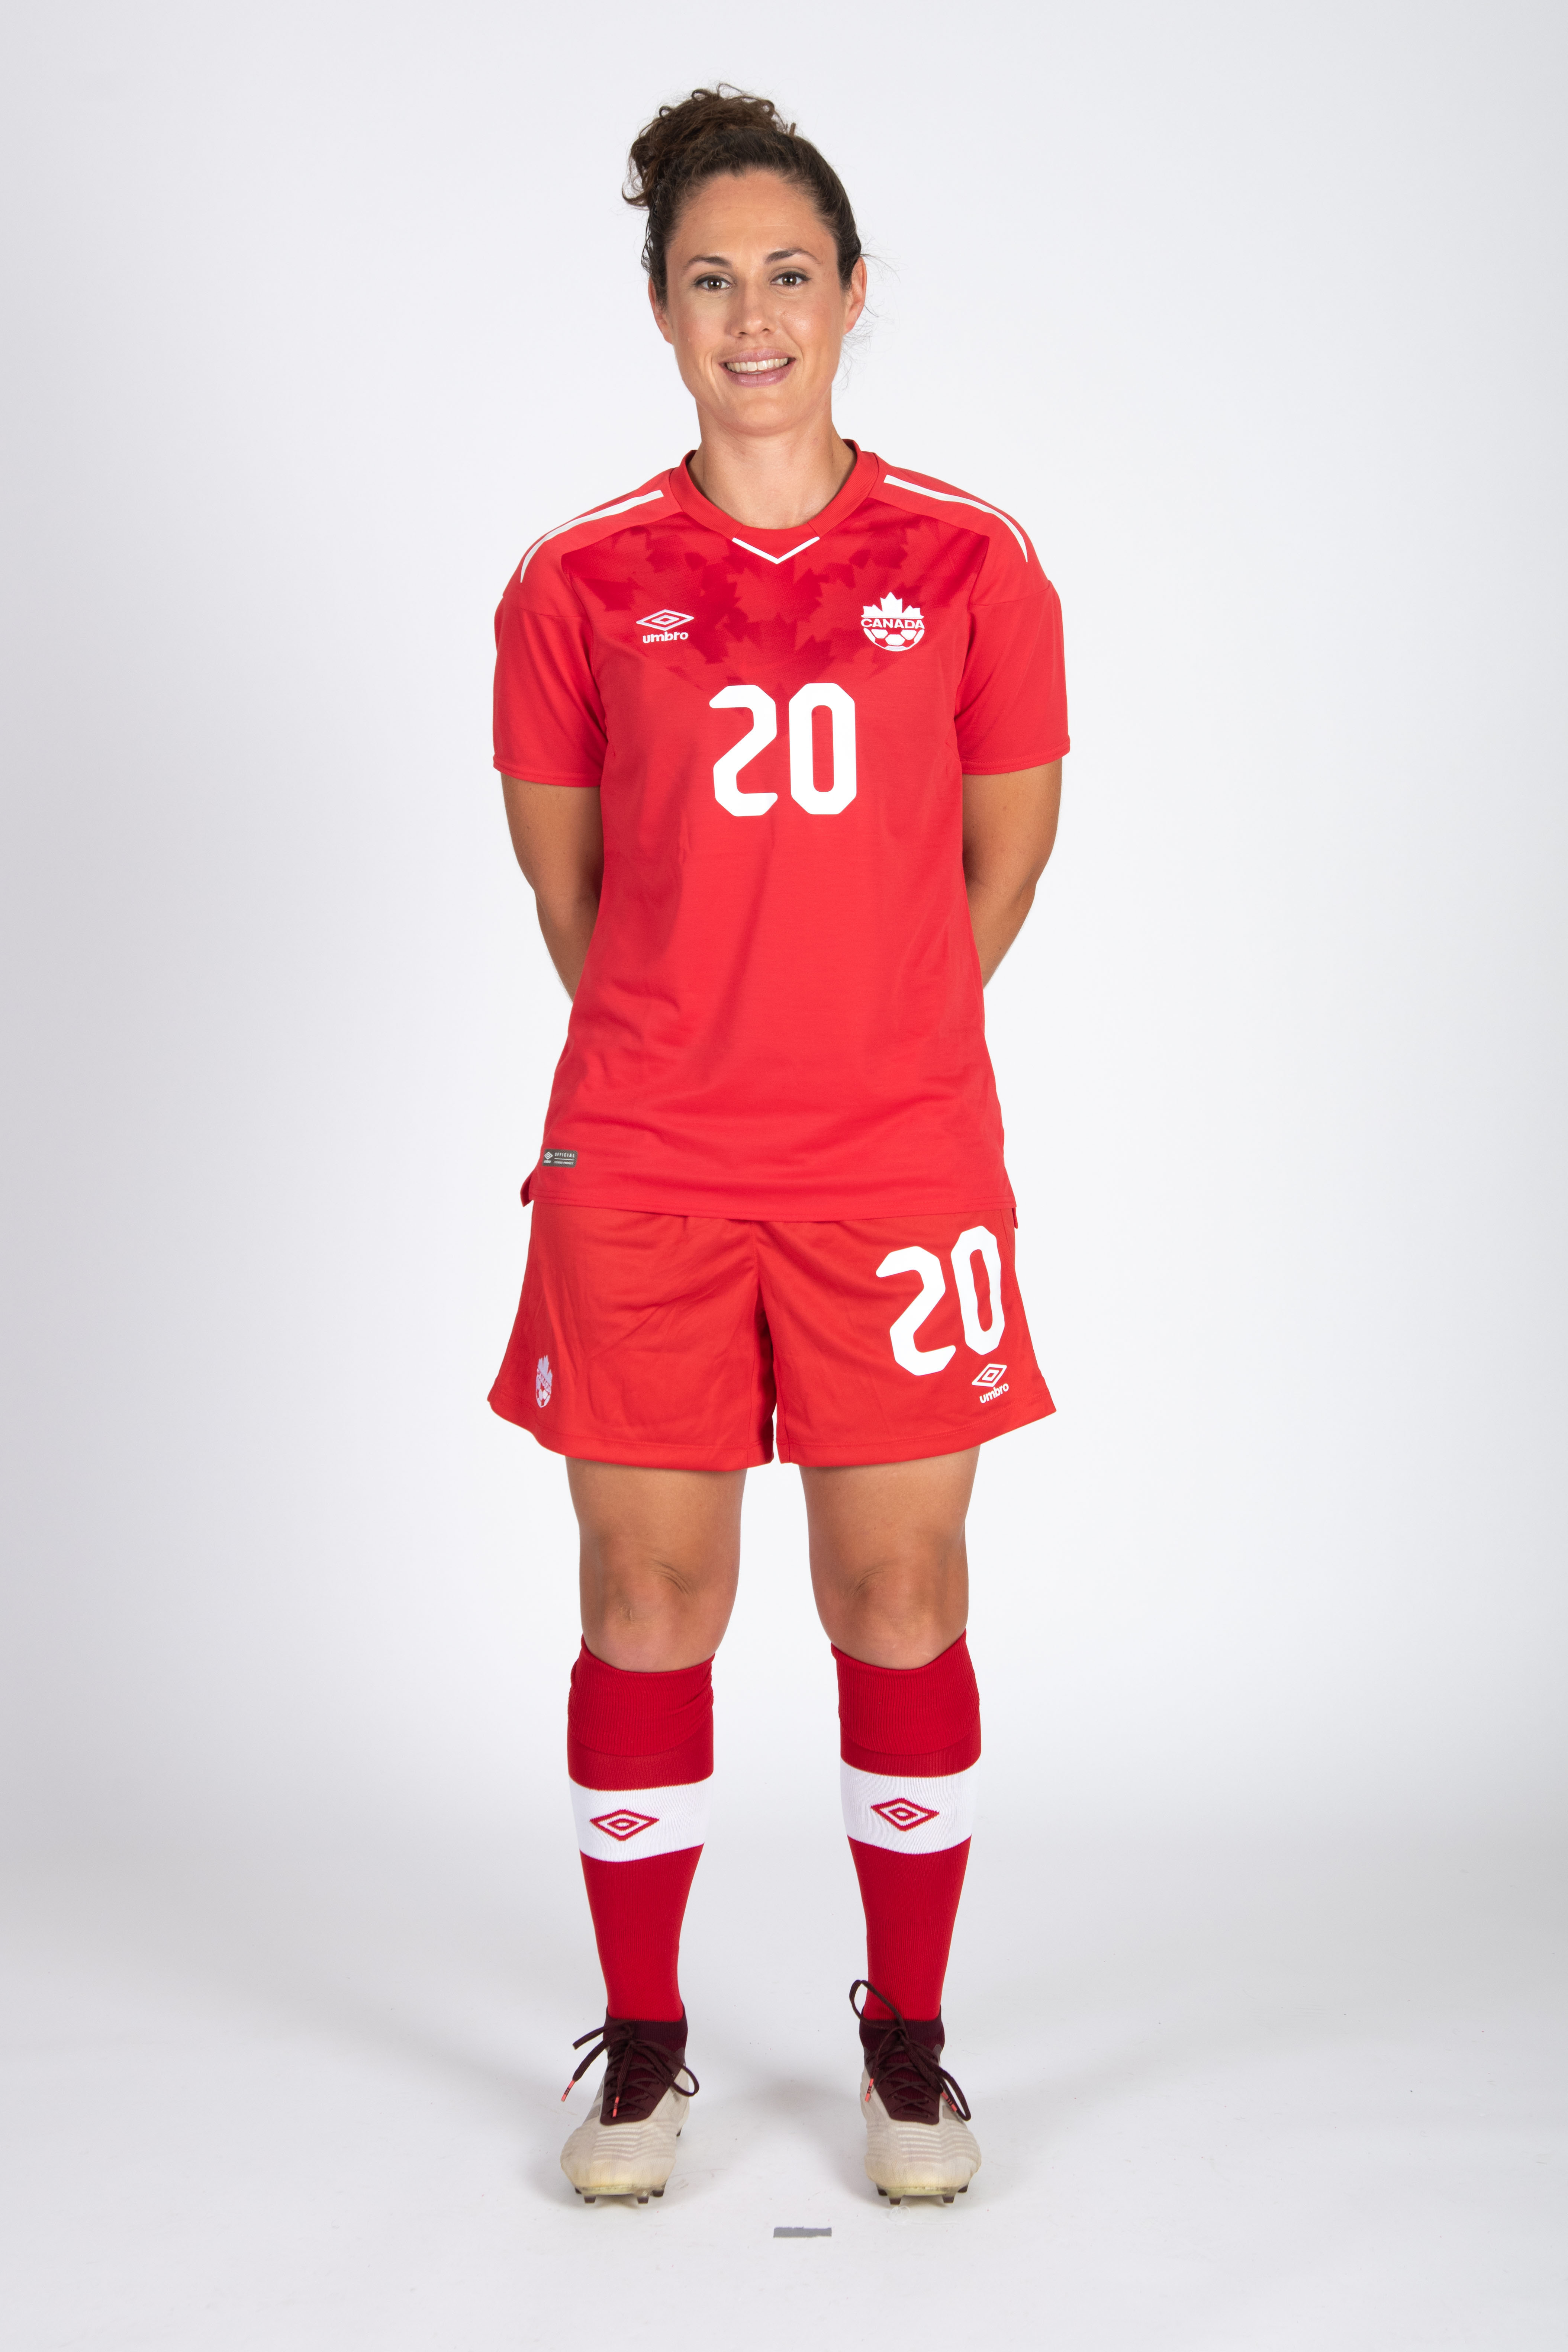 20180604_CANWNT_Woeller_byBazyl01